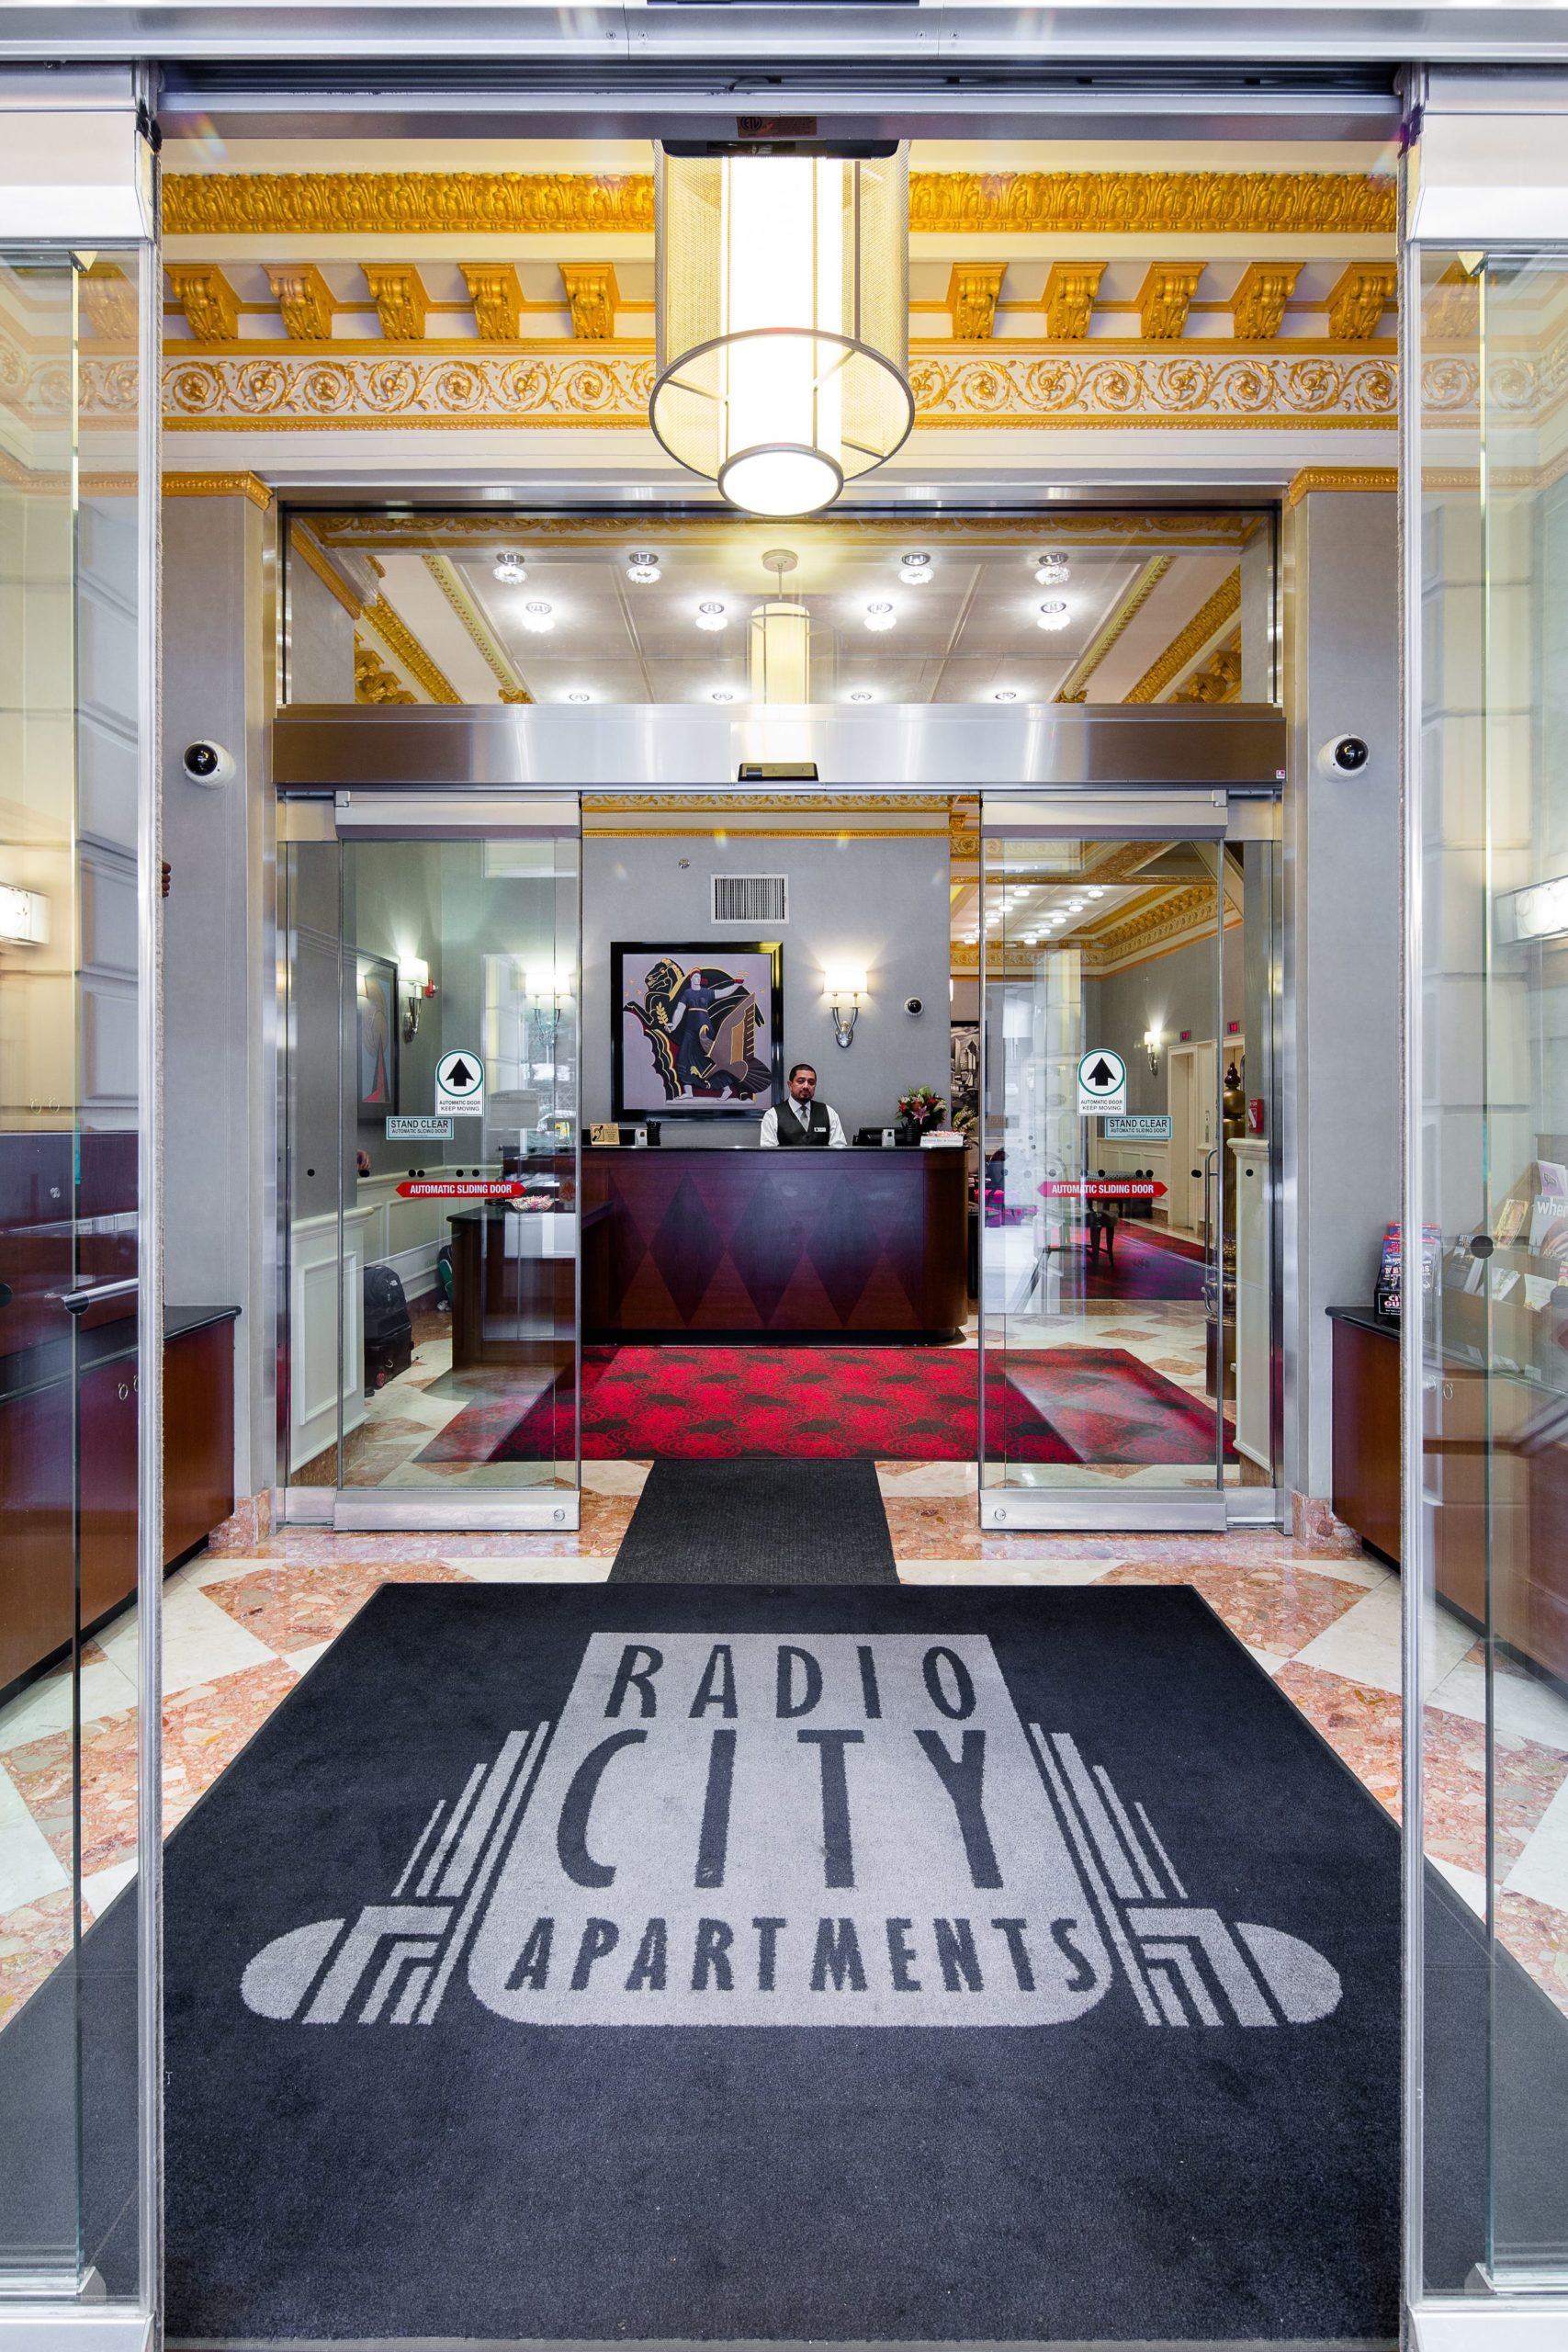 Great deals on New York Hotels - Radio City Apartments